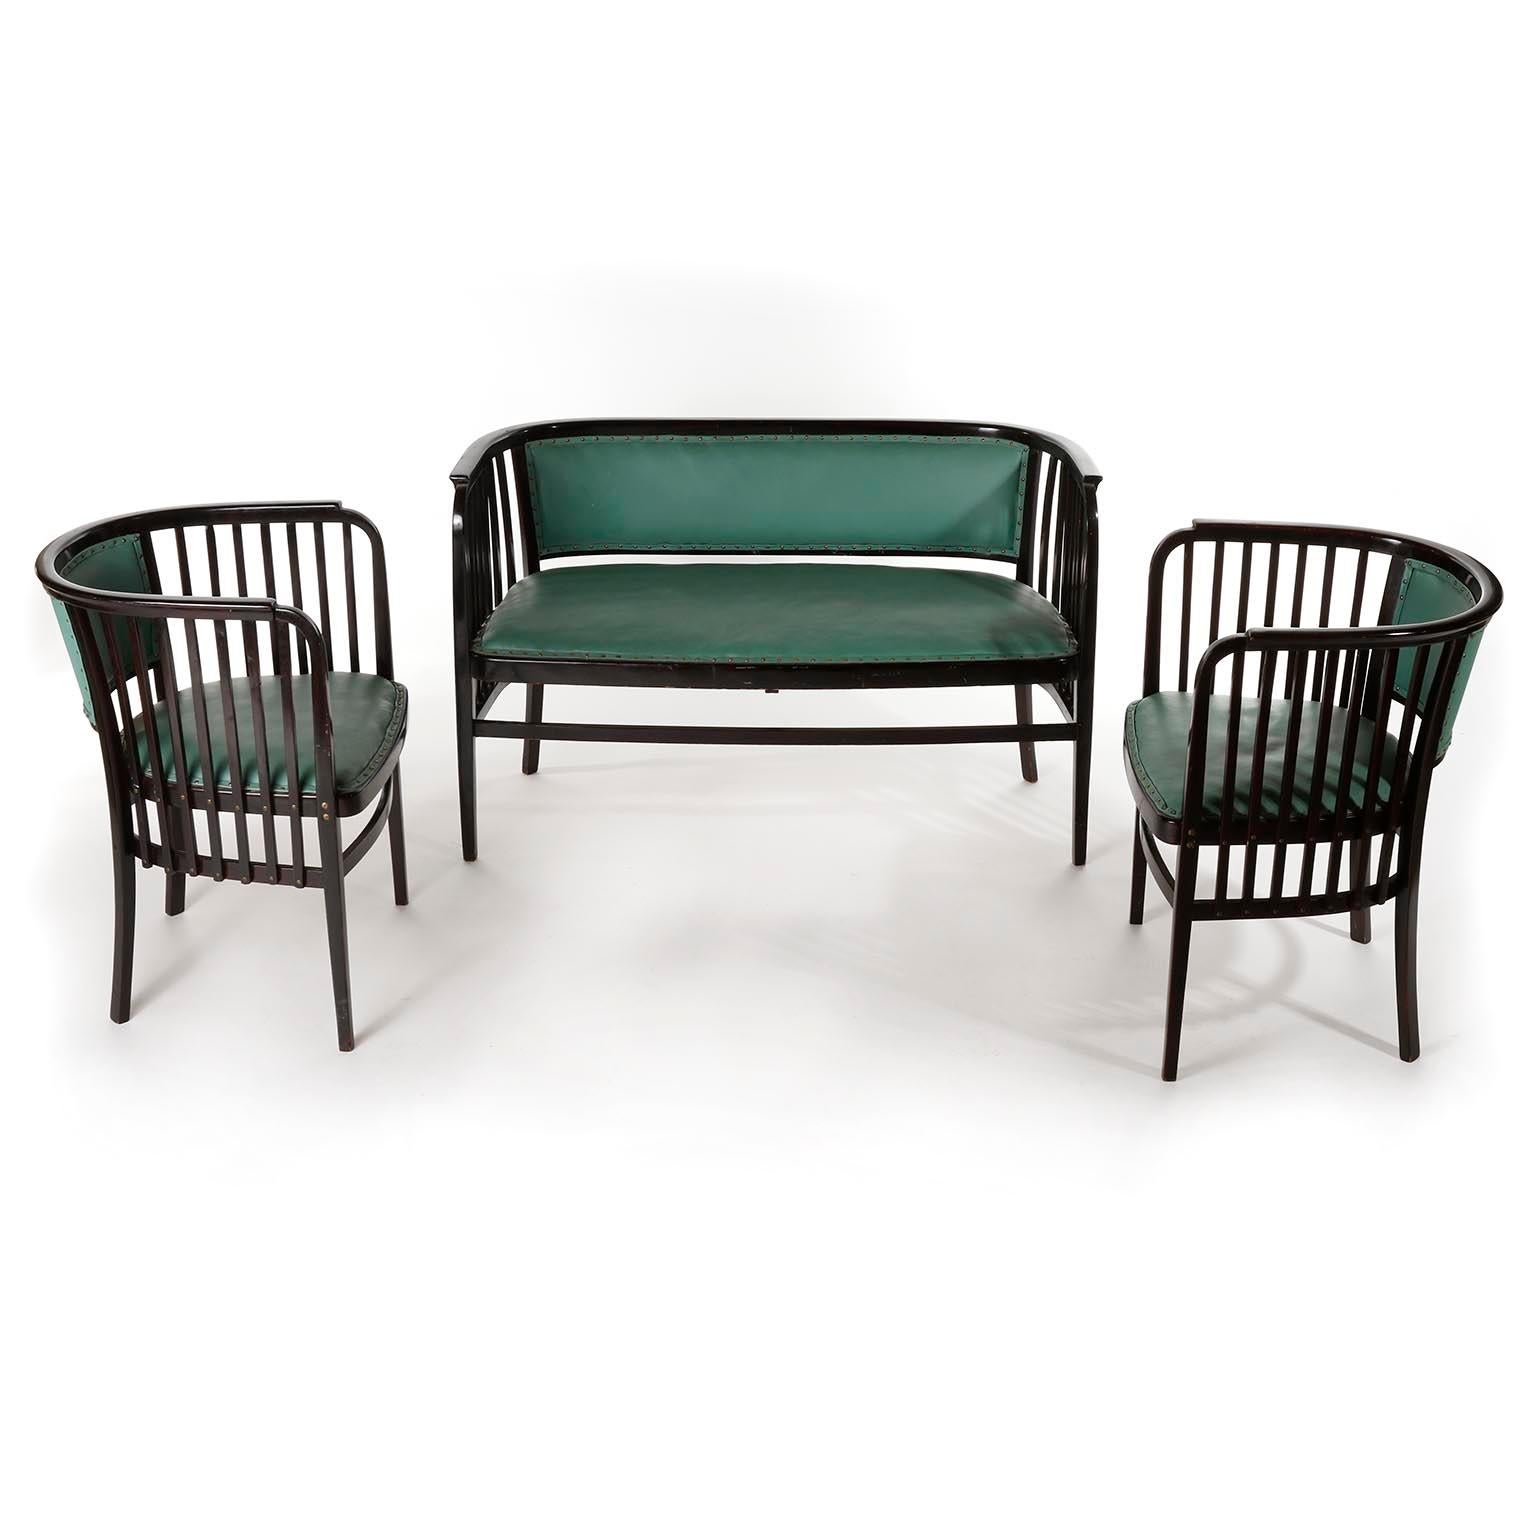 Early 20th Century Marcel Kammerer Settee Bench Seat, Thonet Austria, Turquoise Green Leather, 1910 For Sale